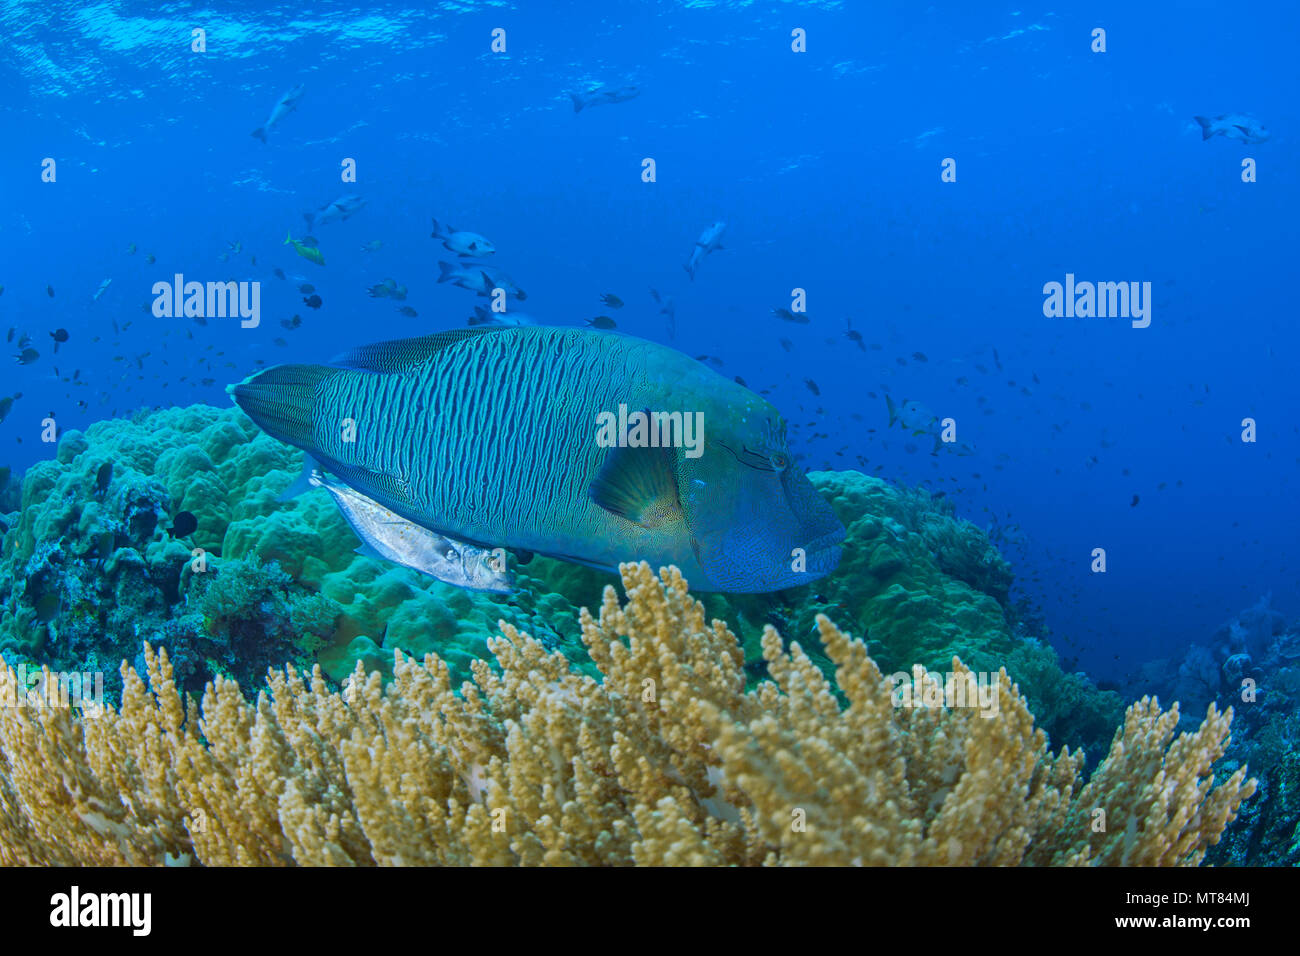 Napoleon or humphead wrasse (Cheilinus undulatus) and a bluefin trevally (Caranx melampygus), a pair commonly seen together patrol a reef in Raja Ampa Stock Photo